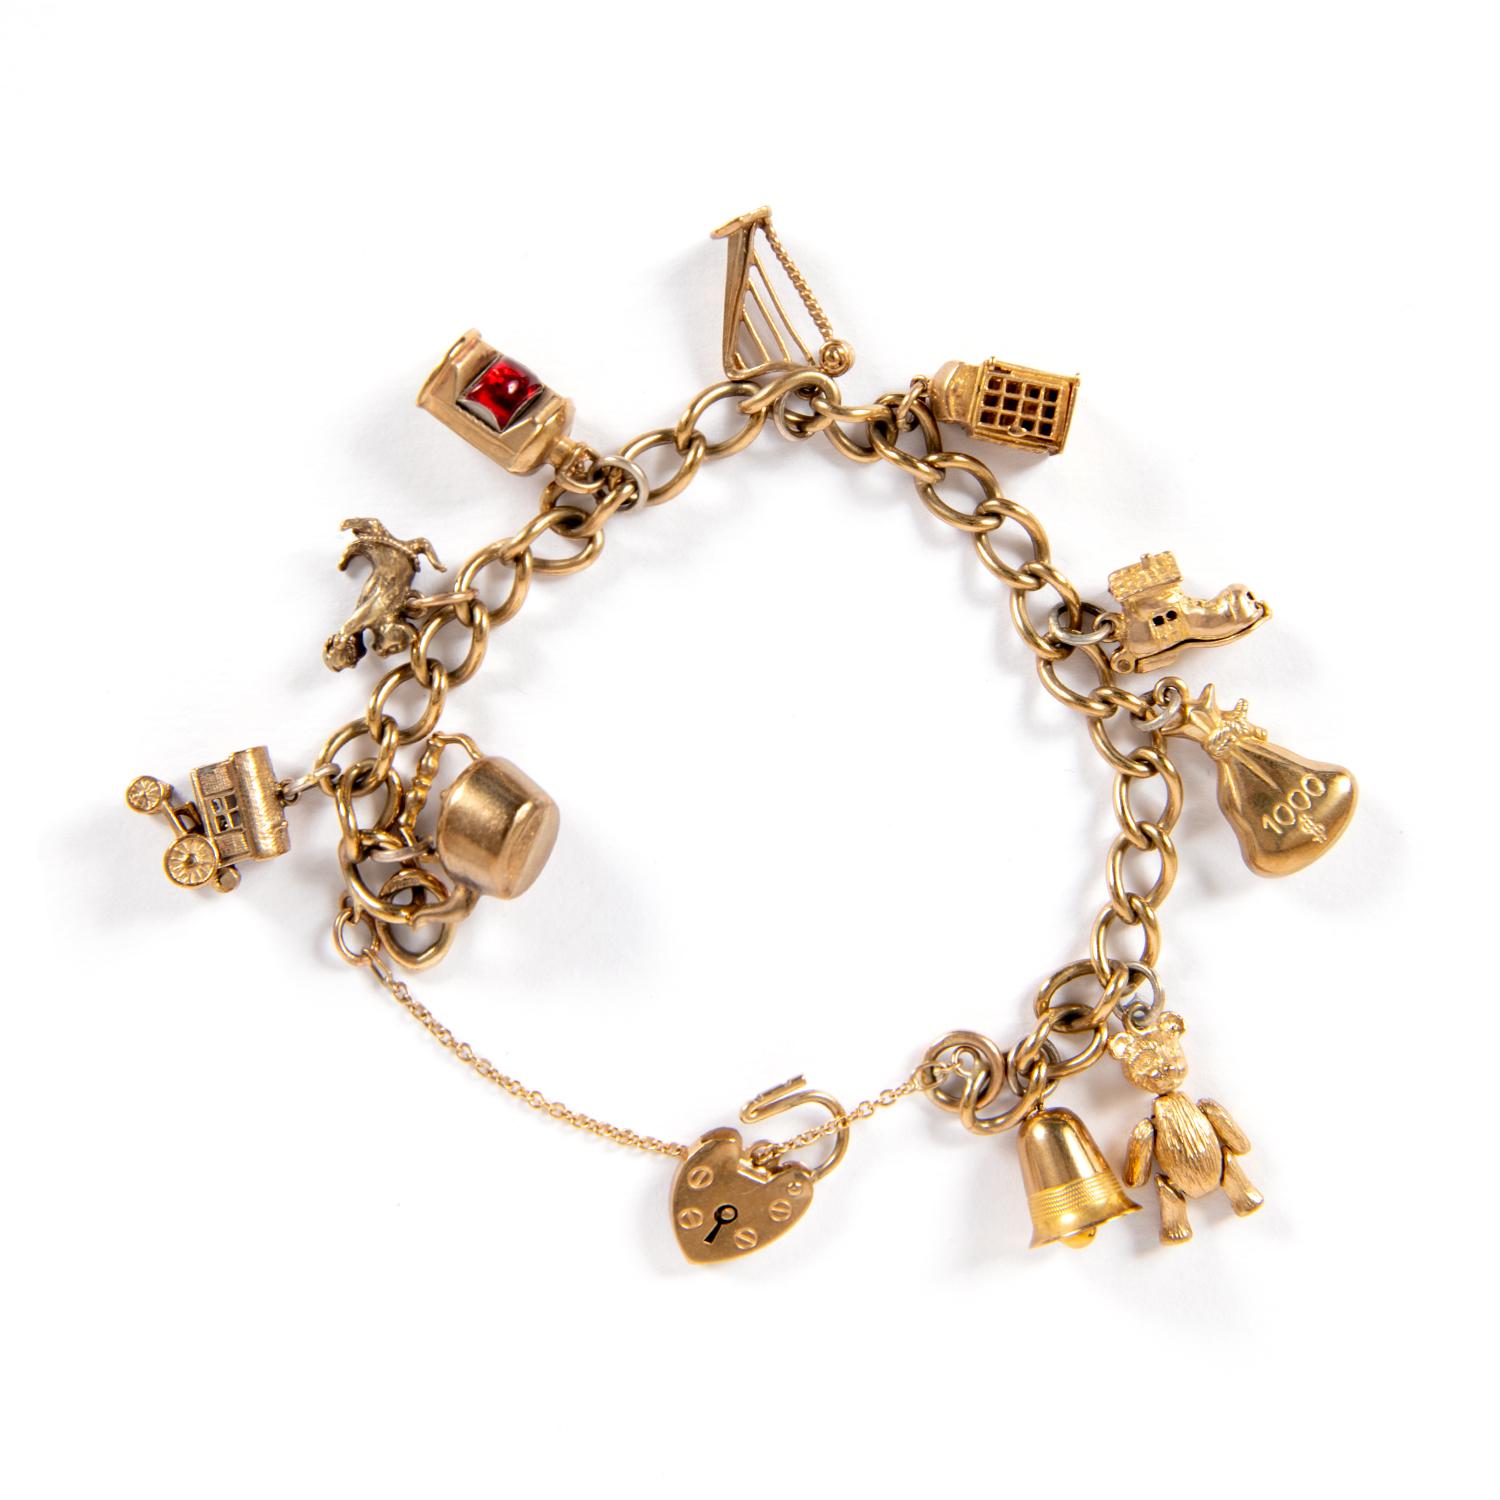 Very Beautiful Vintage 9 carat Gold Charms Bracelet England Mid 900'
The bracelet is made up of 10 classic pendants with various forms of common life and iconic British, lucky charms, is perfect for night and day.
bracelet length 16 cm